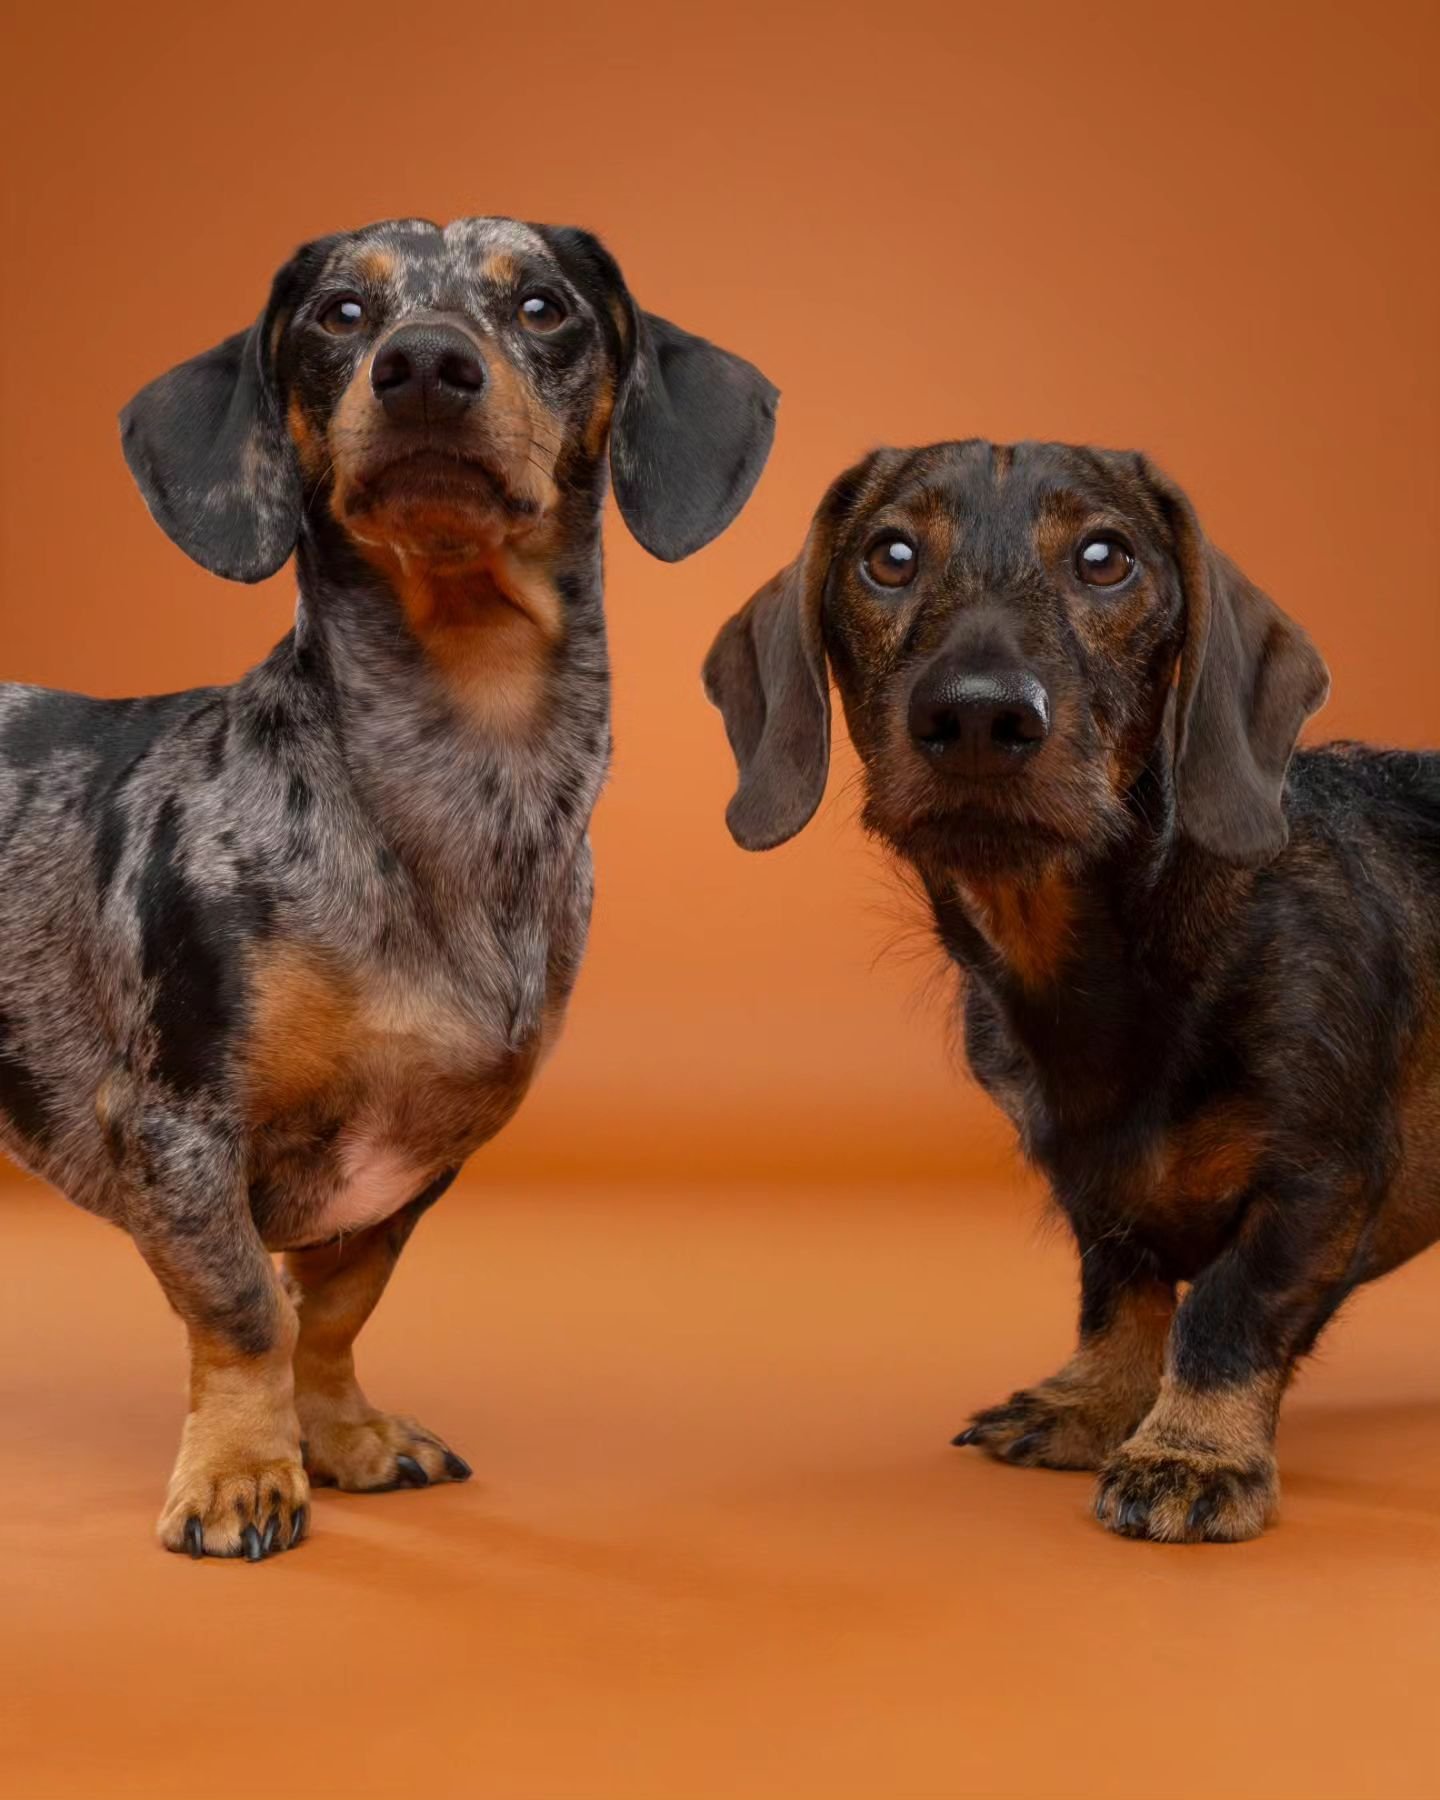 Dudley and Edgar 🤟 Just a pair of Sassy Sausages 💃💃